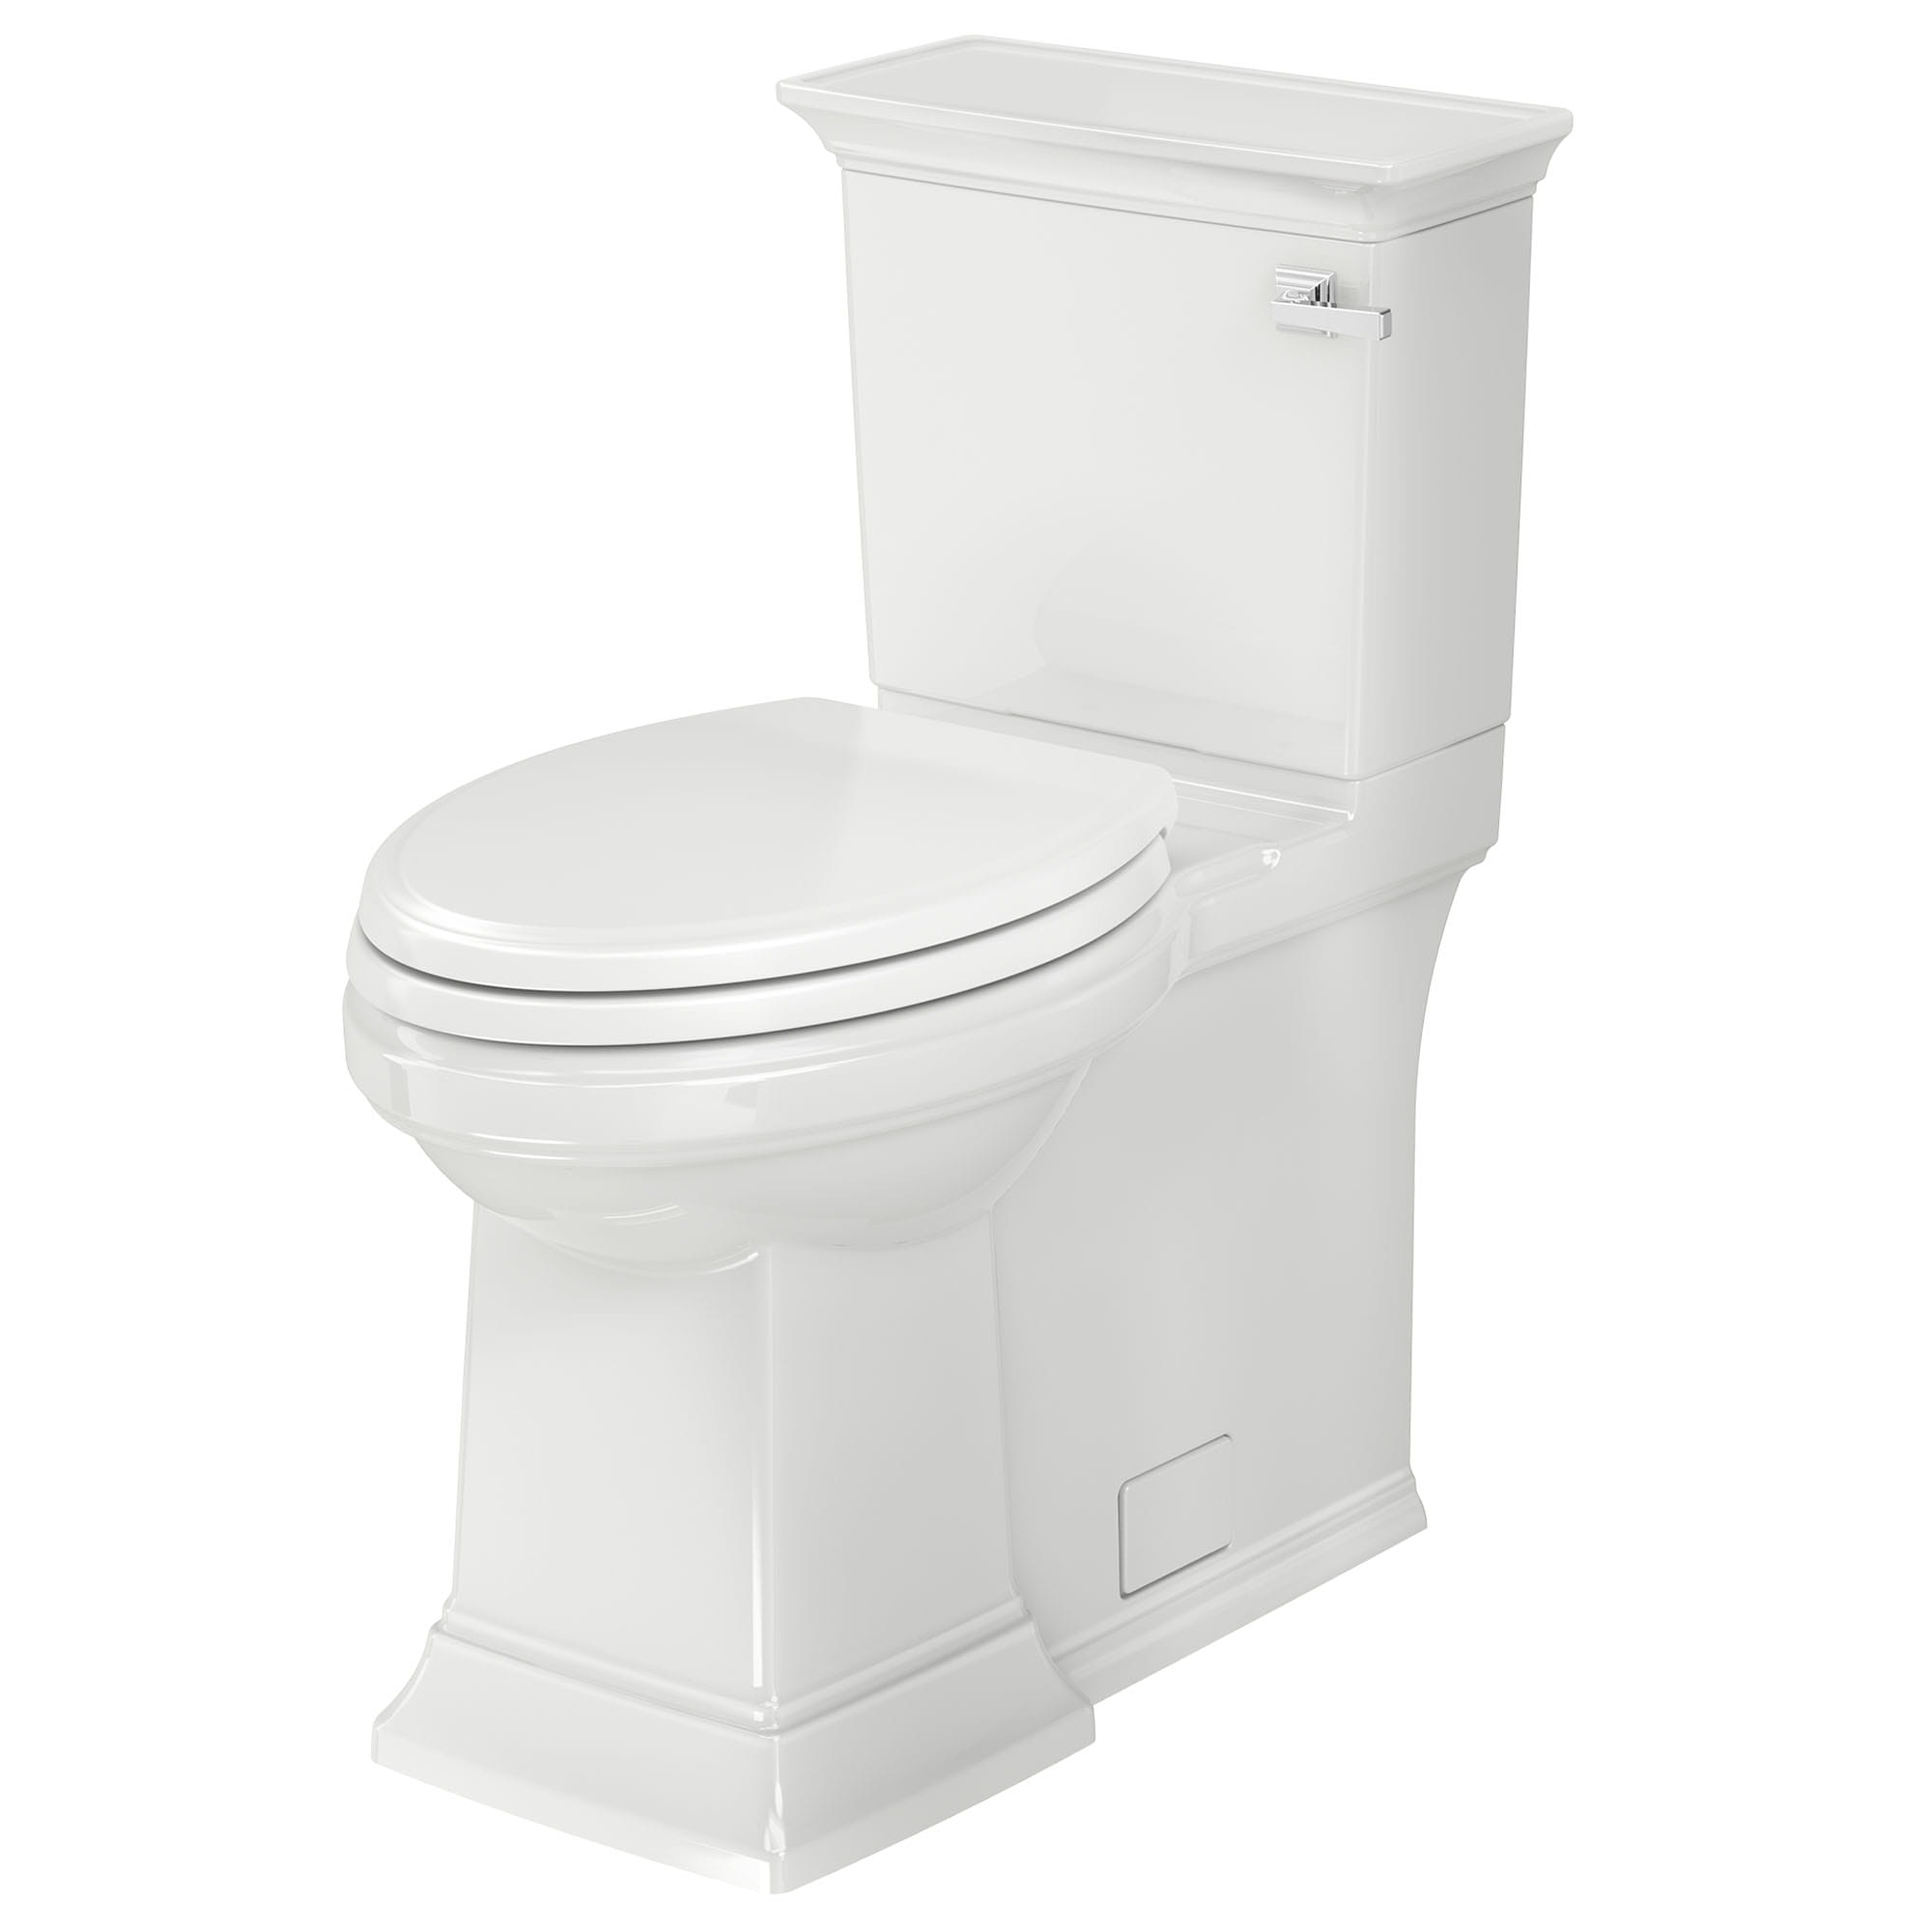 Town Square S Skirted Two Piece 128 gpf 48 Lpf Chair Height Right Hand Trip Lever Elongated Toilet With Seat WHITE